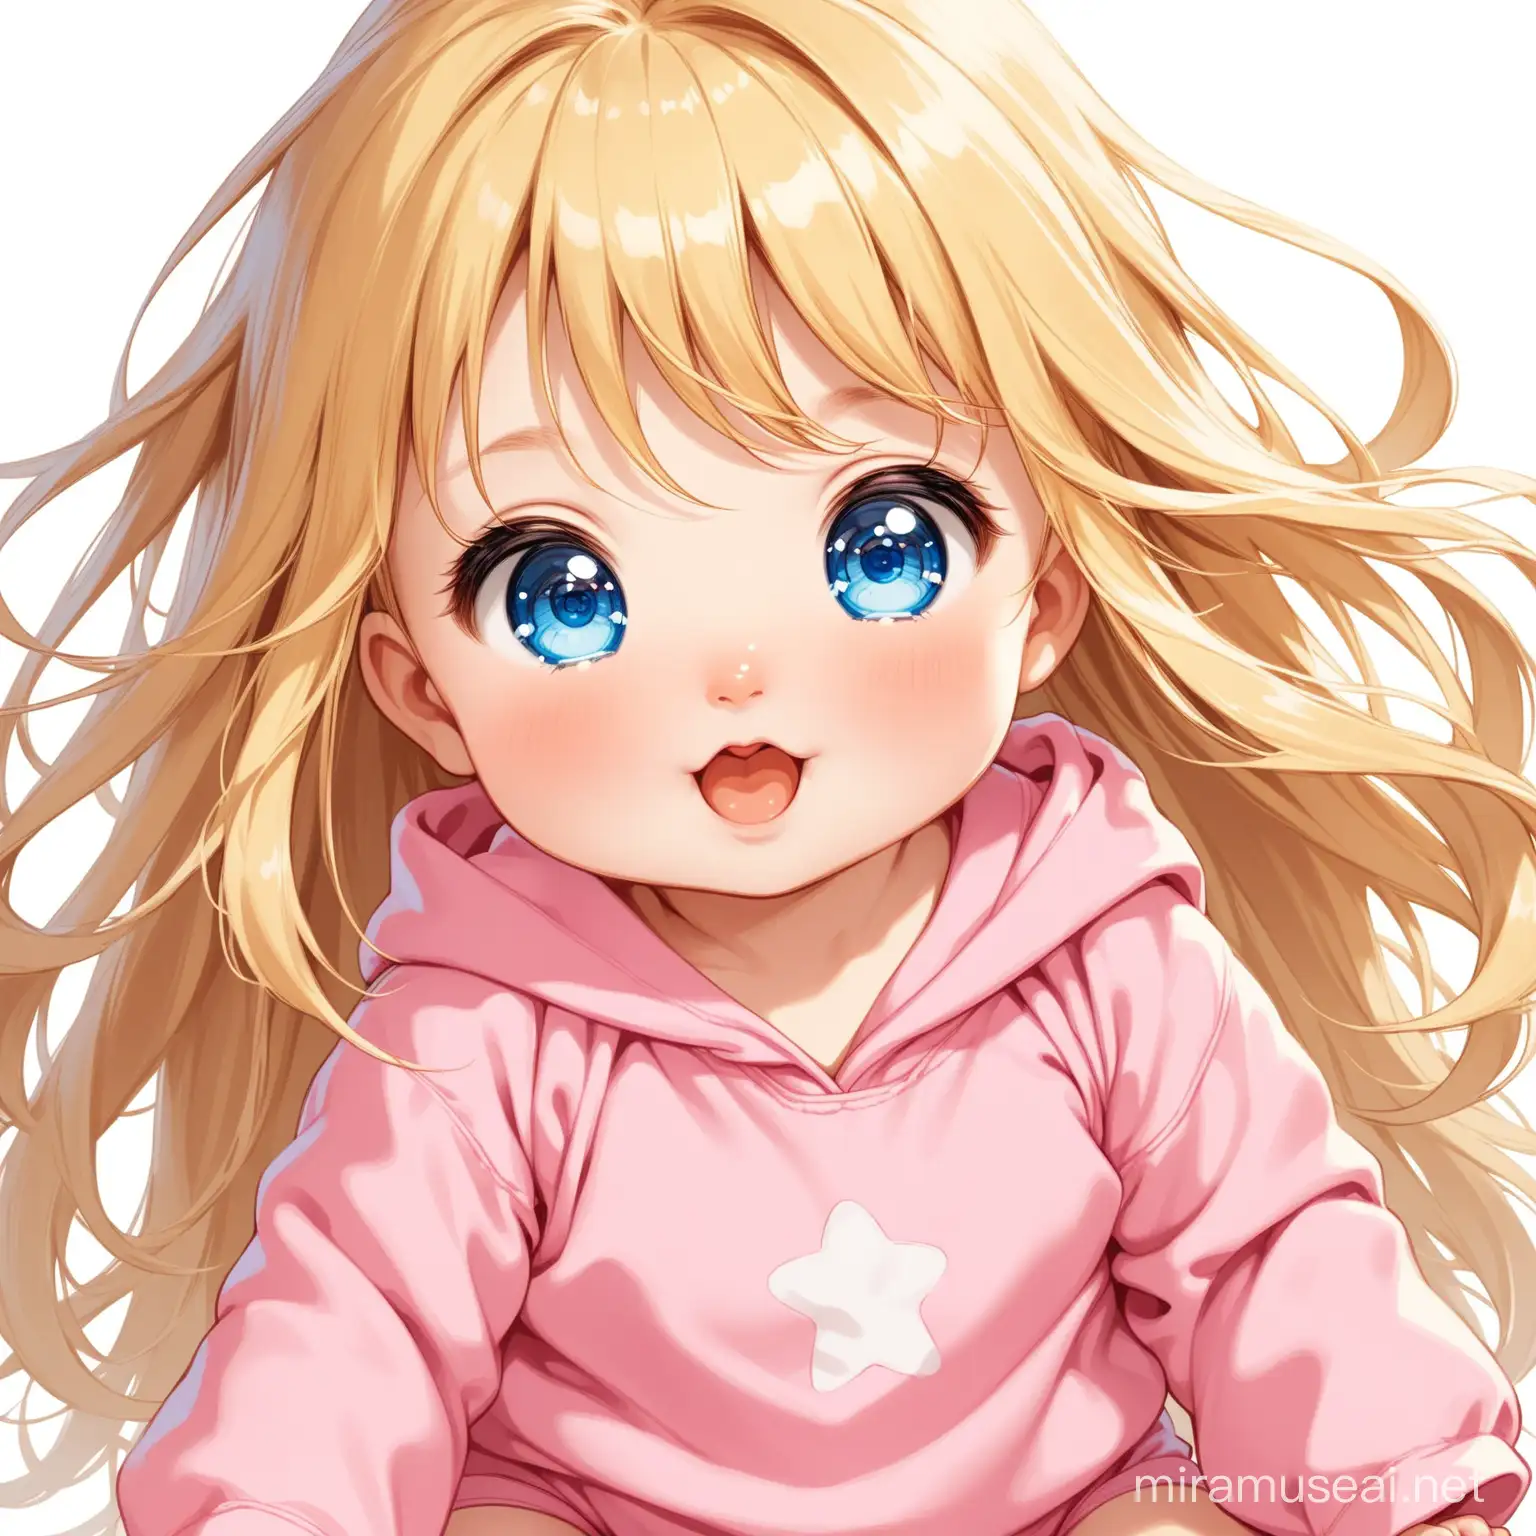 Cute and happy baby girl with blue eyes, messy long blonde hair wearing a pink onsie.